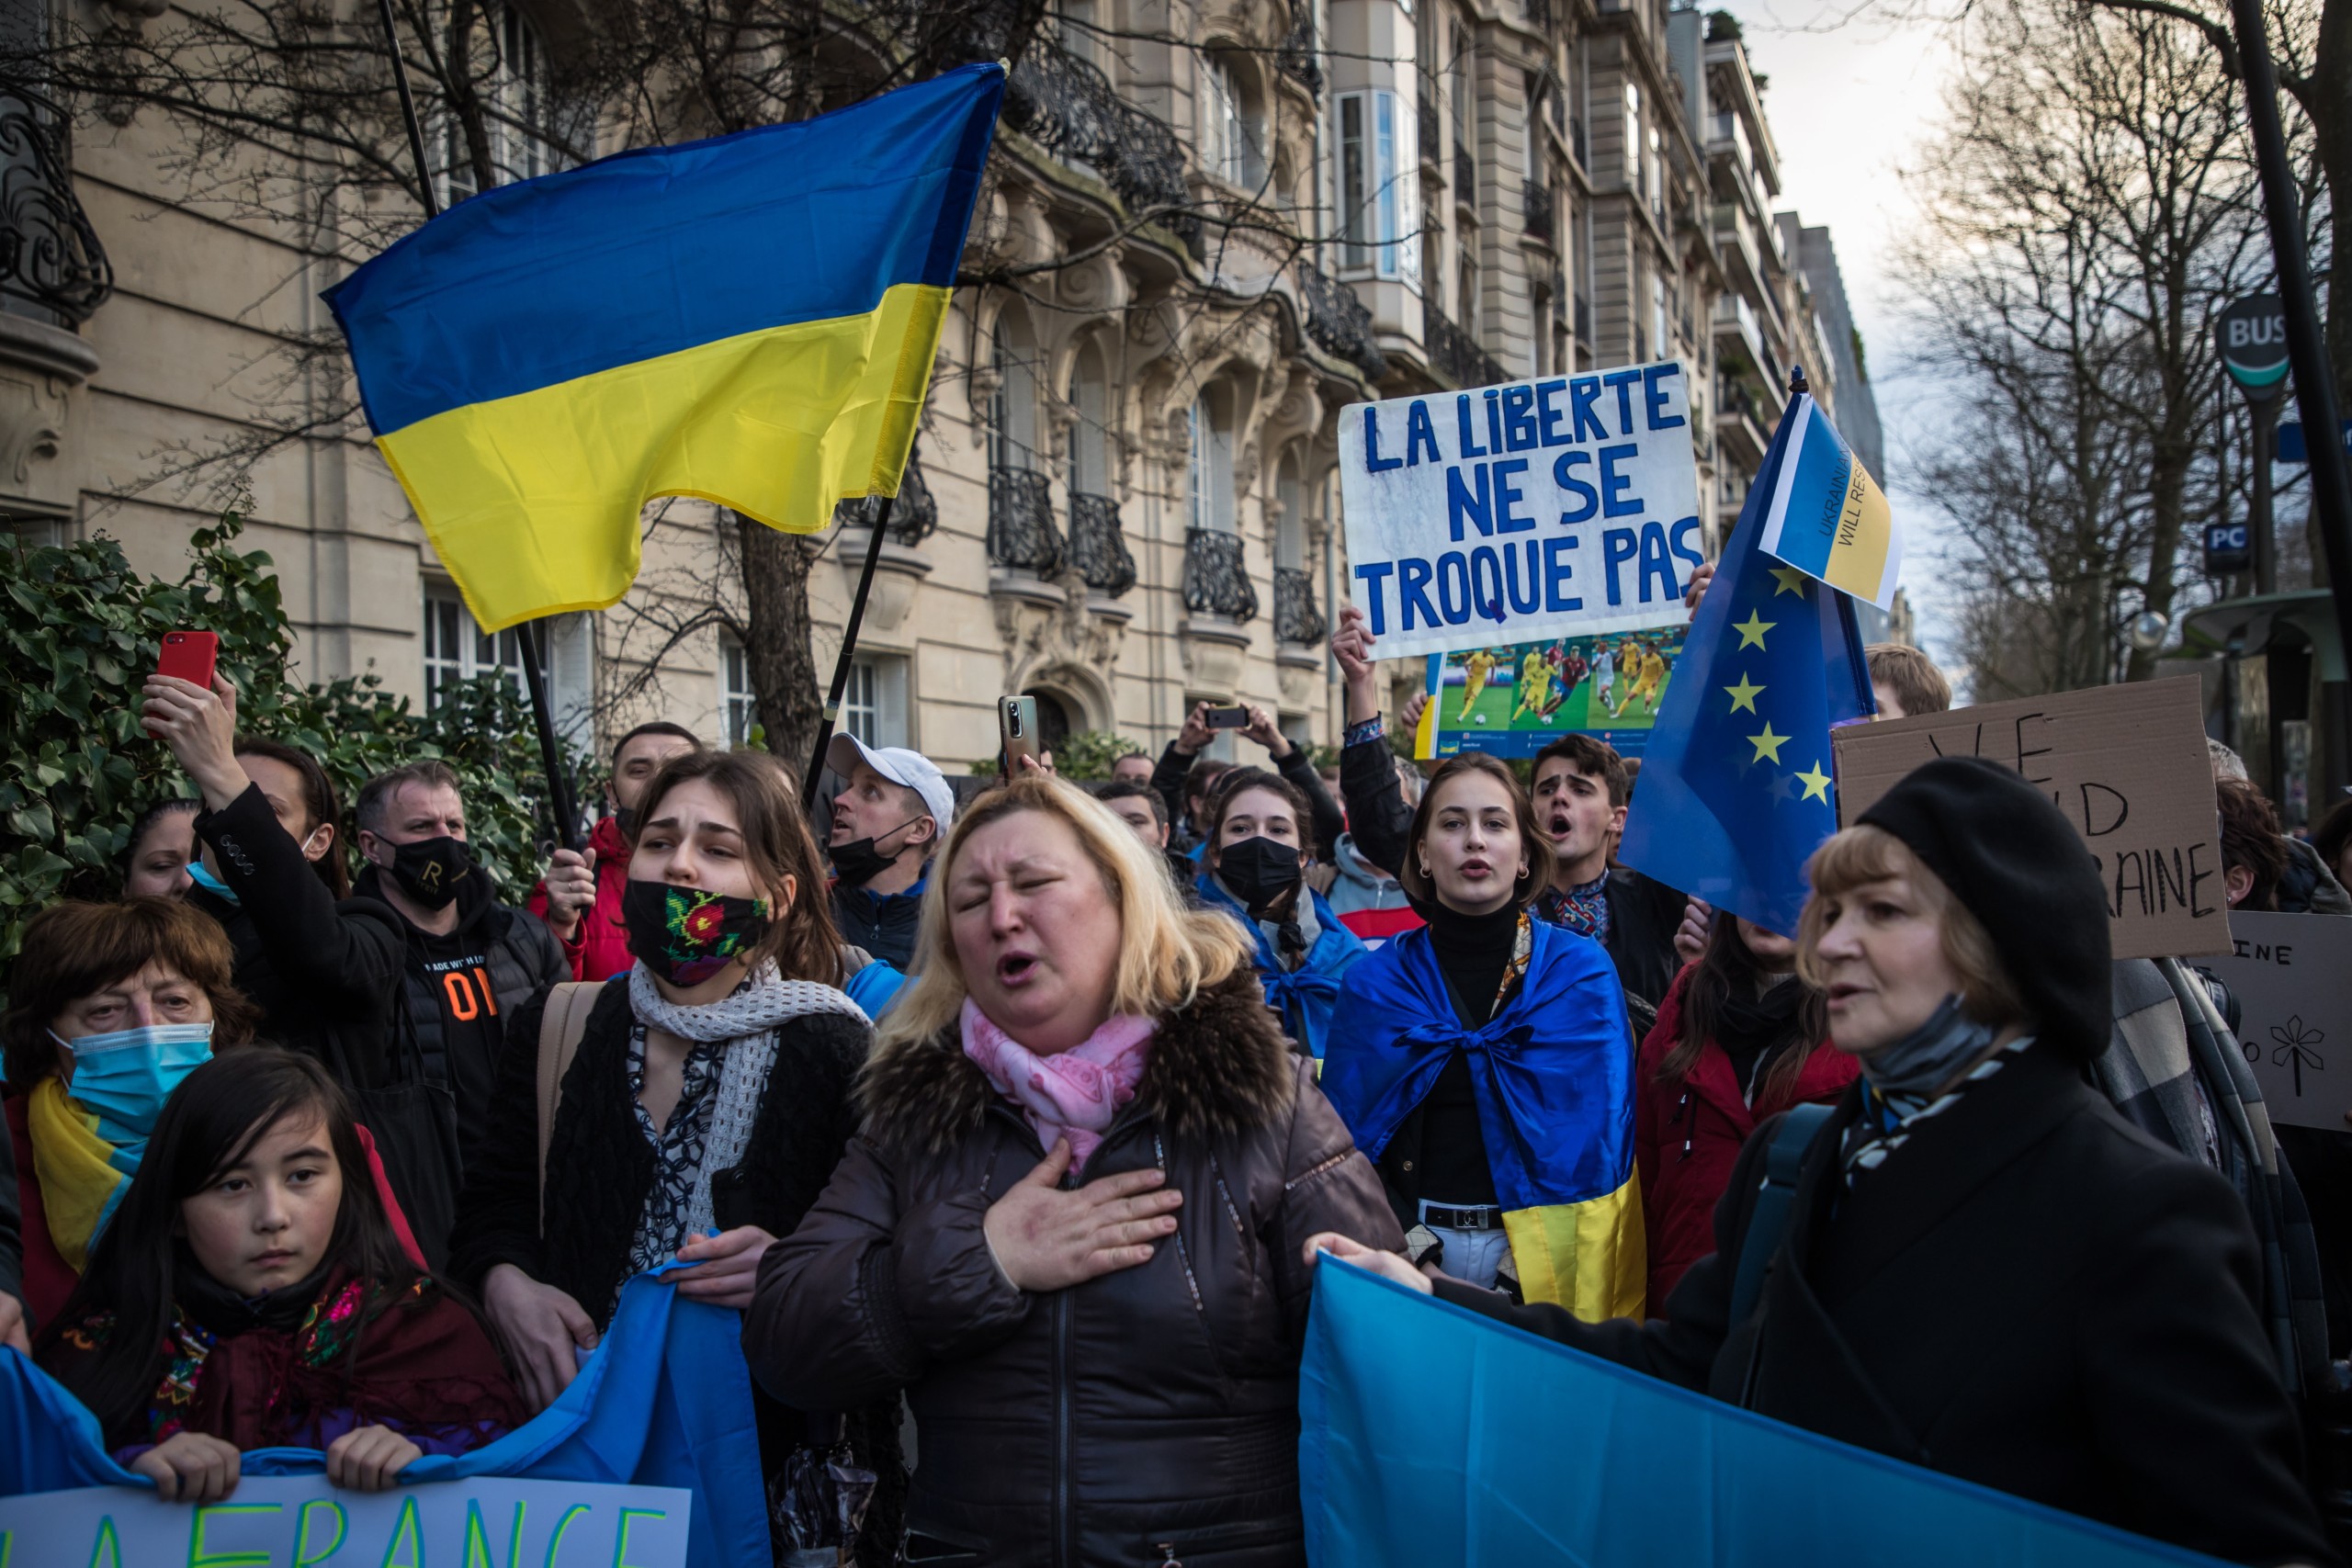 epa09777263 French-Ukrainian community members and pro-European activists gather in front of the Russian embassy in Paris, France, 22 February 2022 amid escalation on the Ukraine-Russian border.  EPA/CHRISTOPHE PETIT TESSON